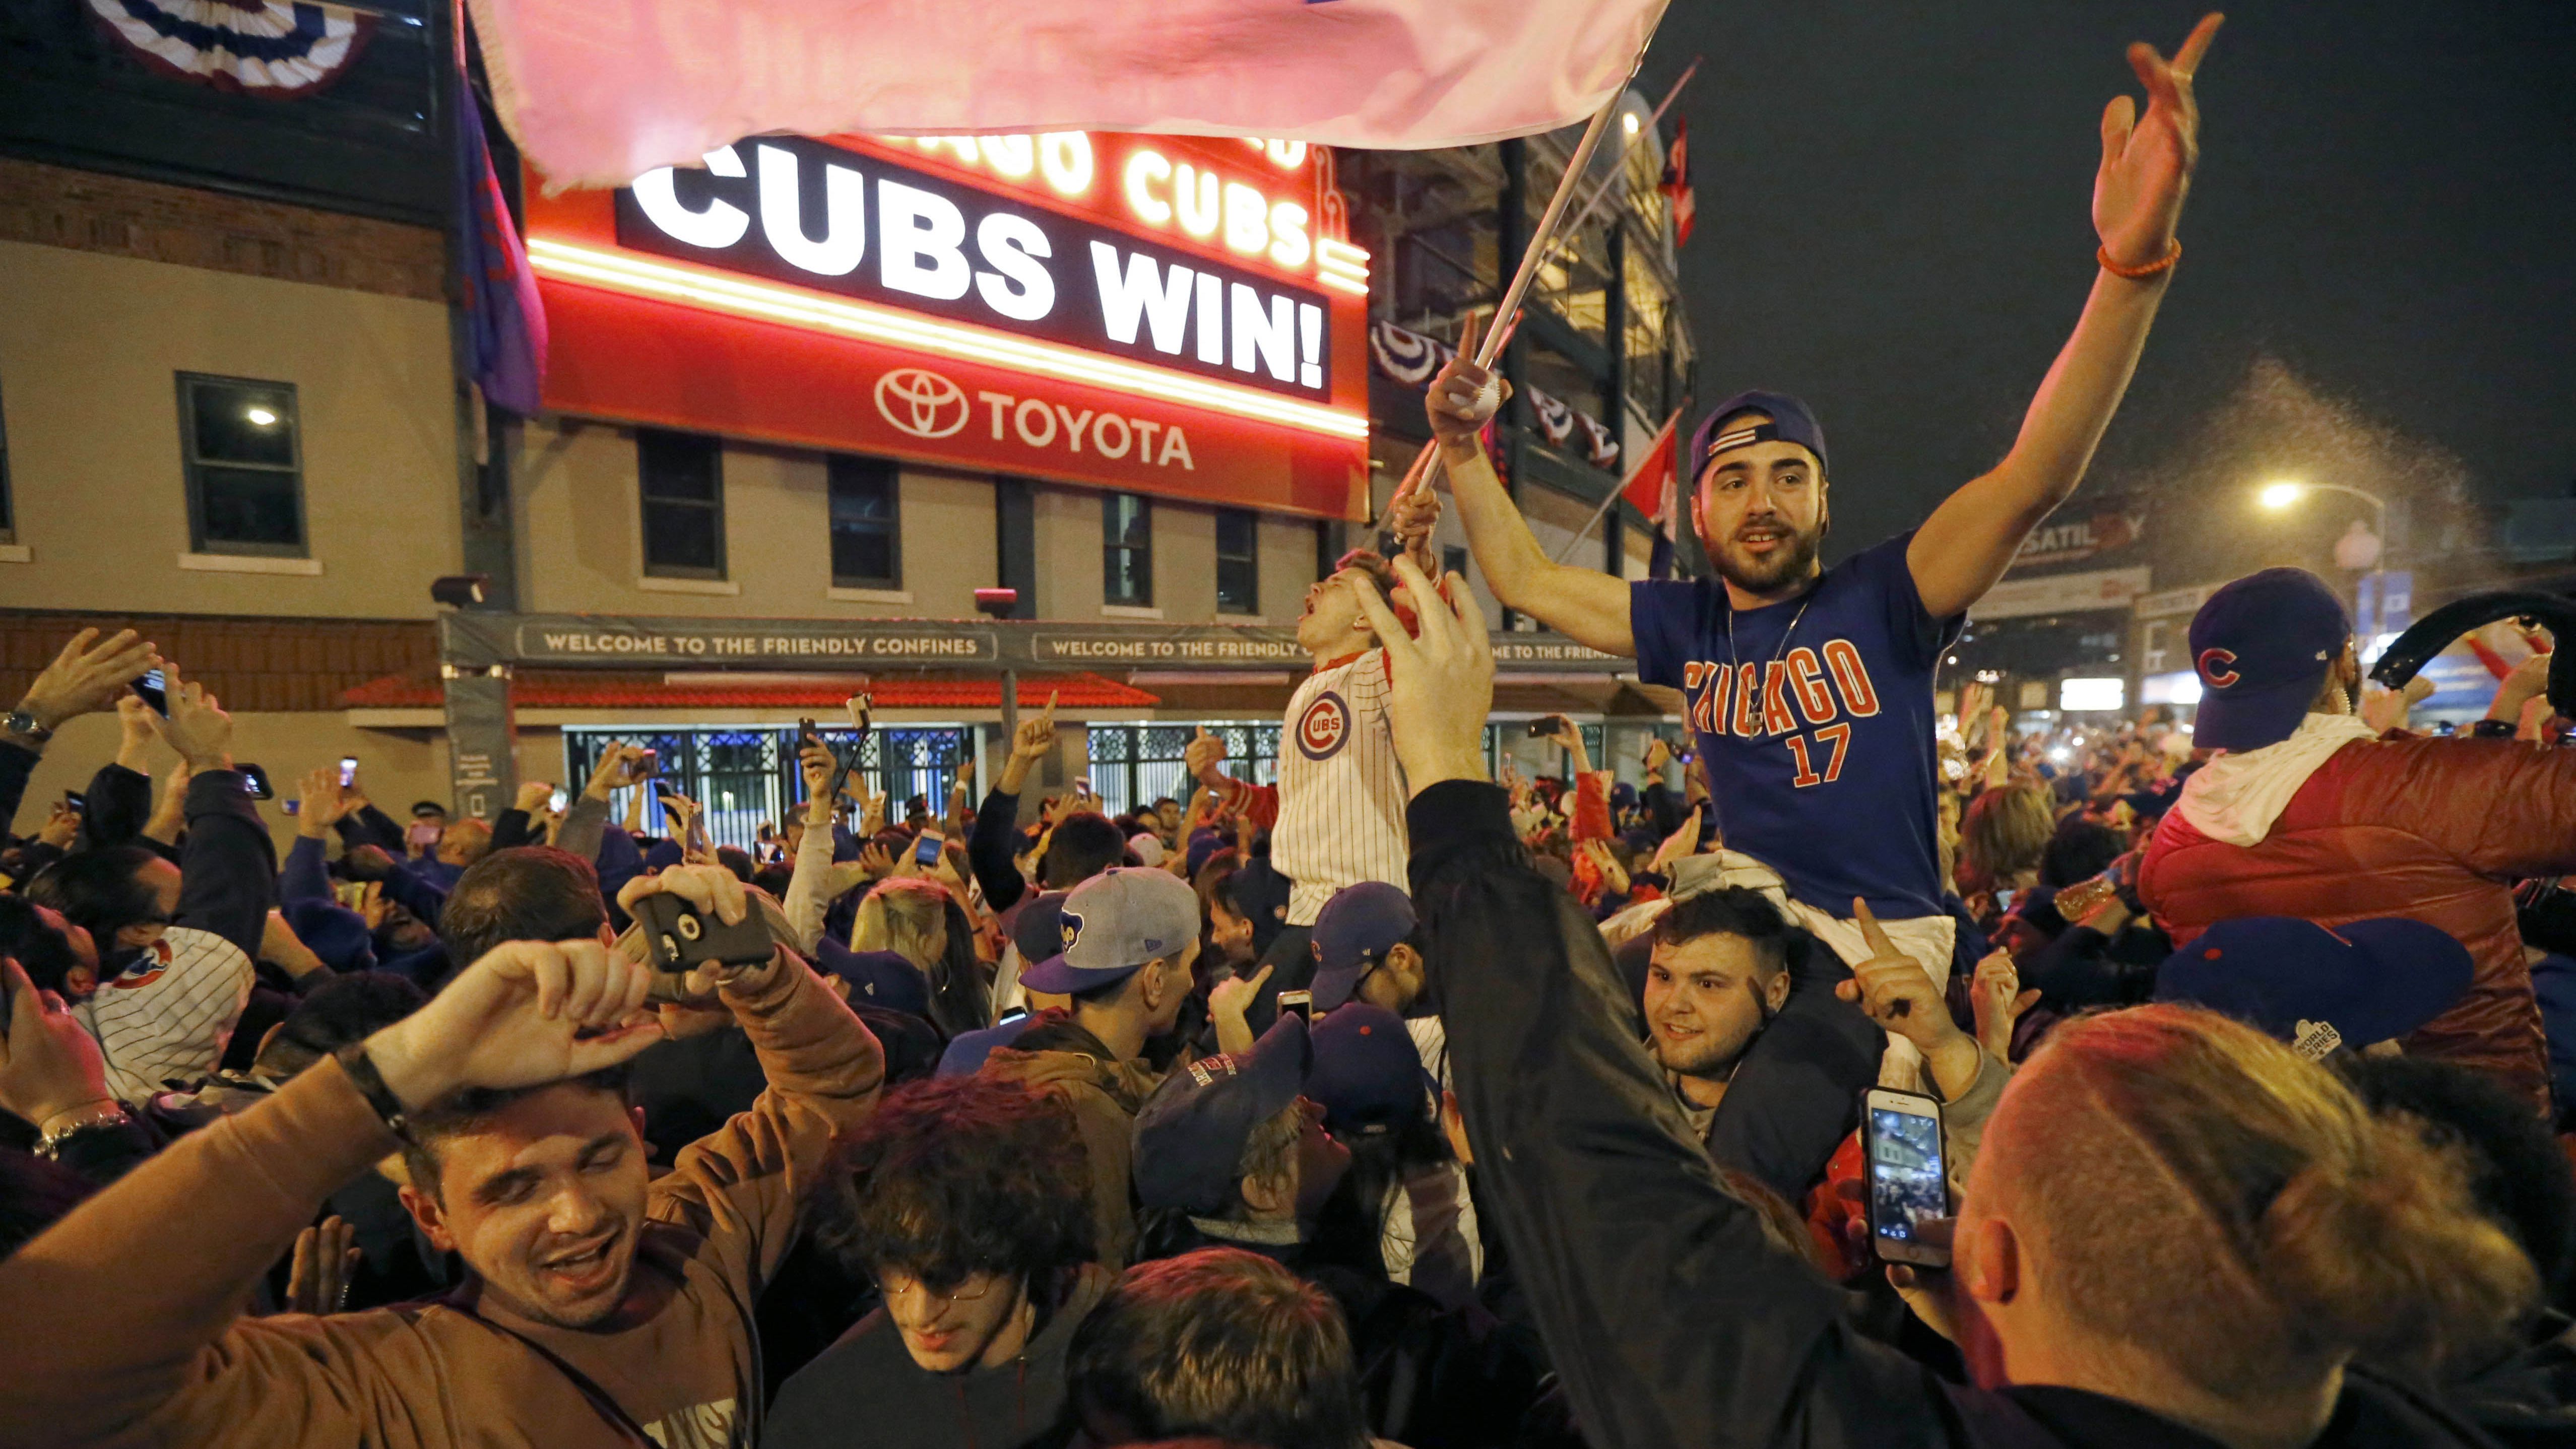 Chicago Cubs celebrate World Series title with massive rally: 'Welcome to  Cubstock 2016!' – New York Daily News